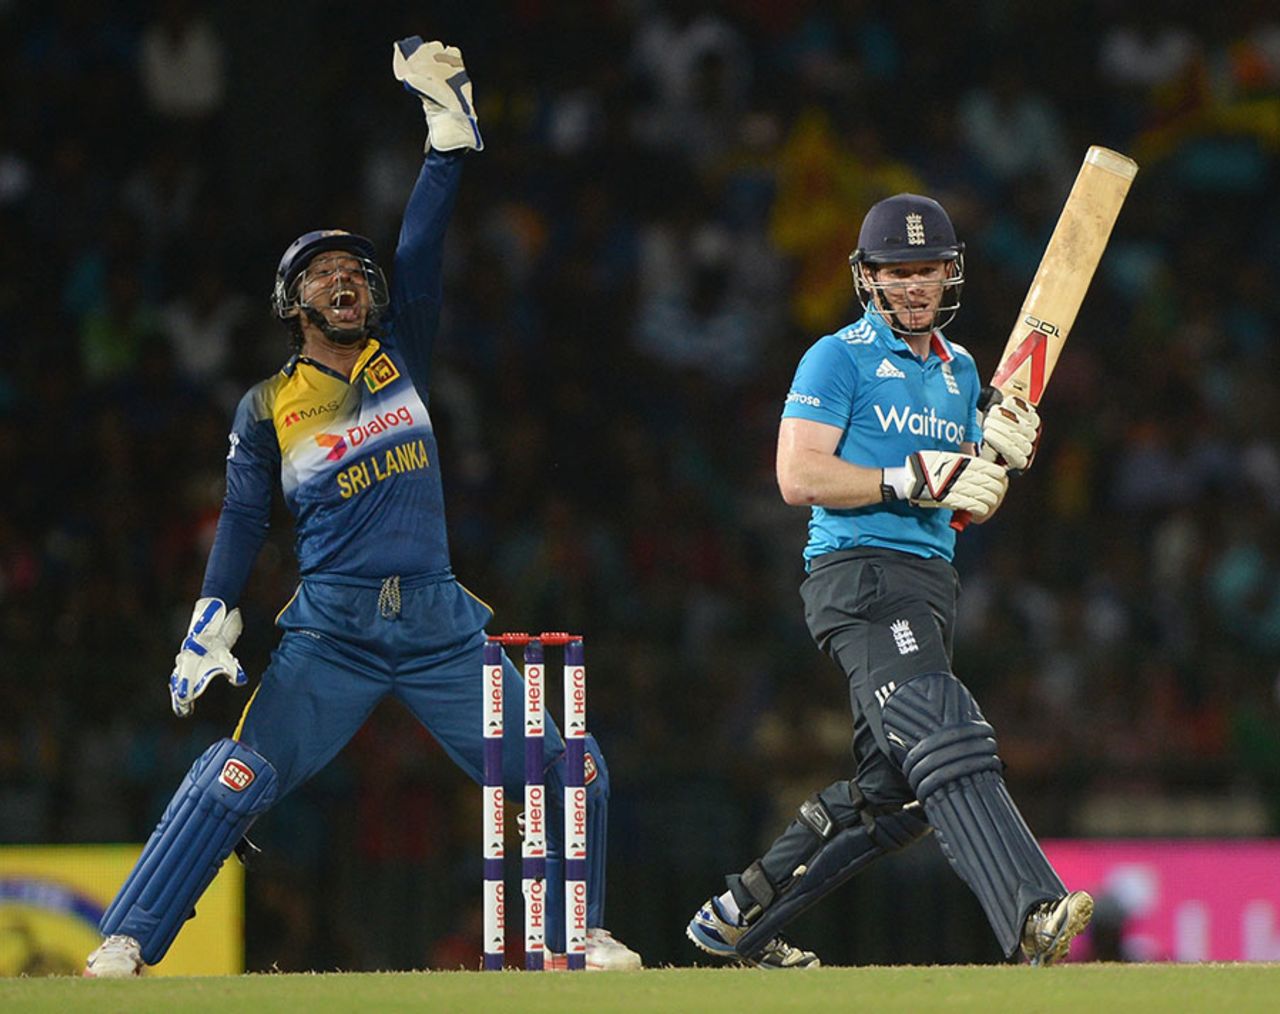 Eoin Morgan was given out lbw on review, Sri Lanka v England, 7th ODI, Colombo, December 16, 2014